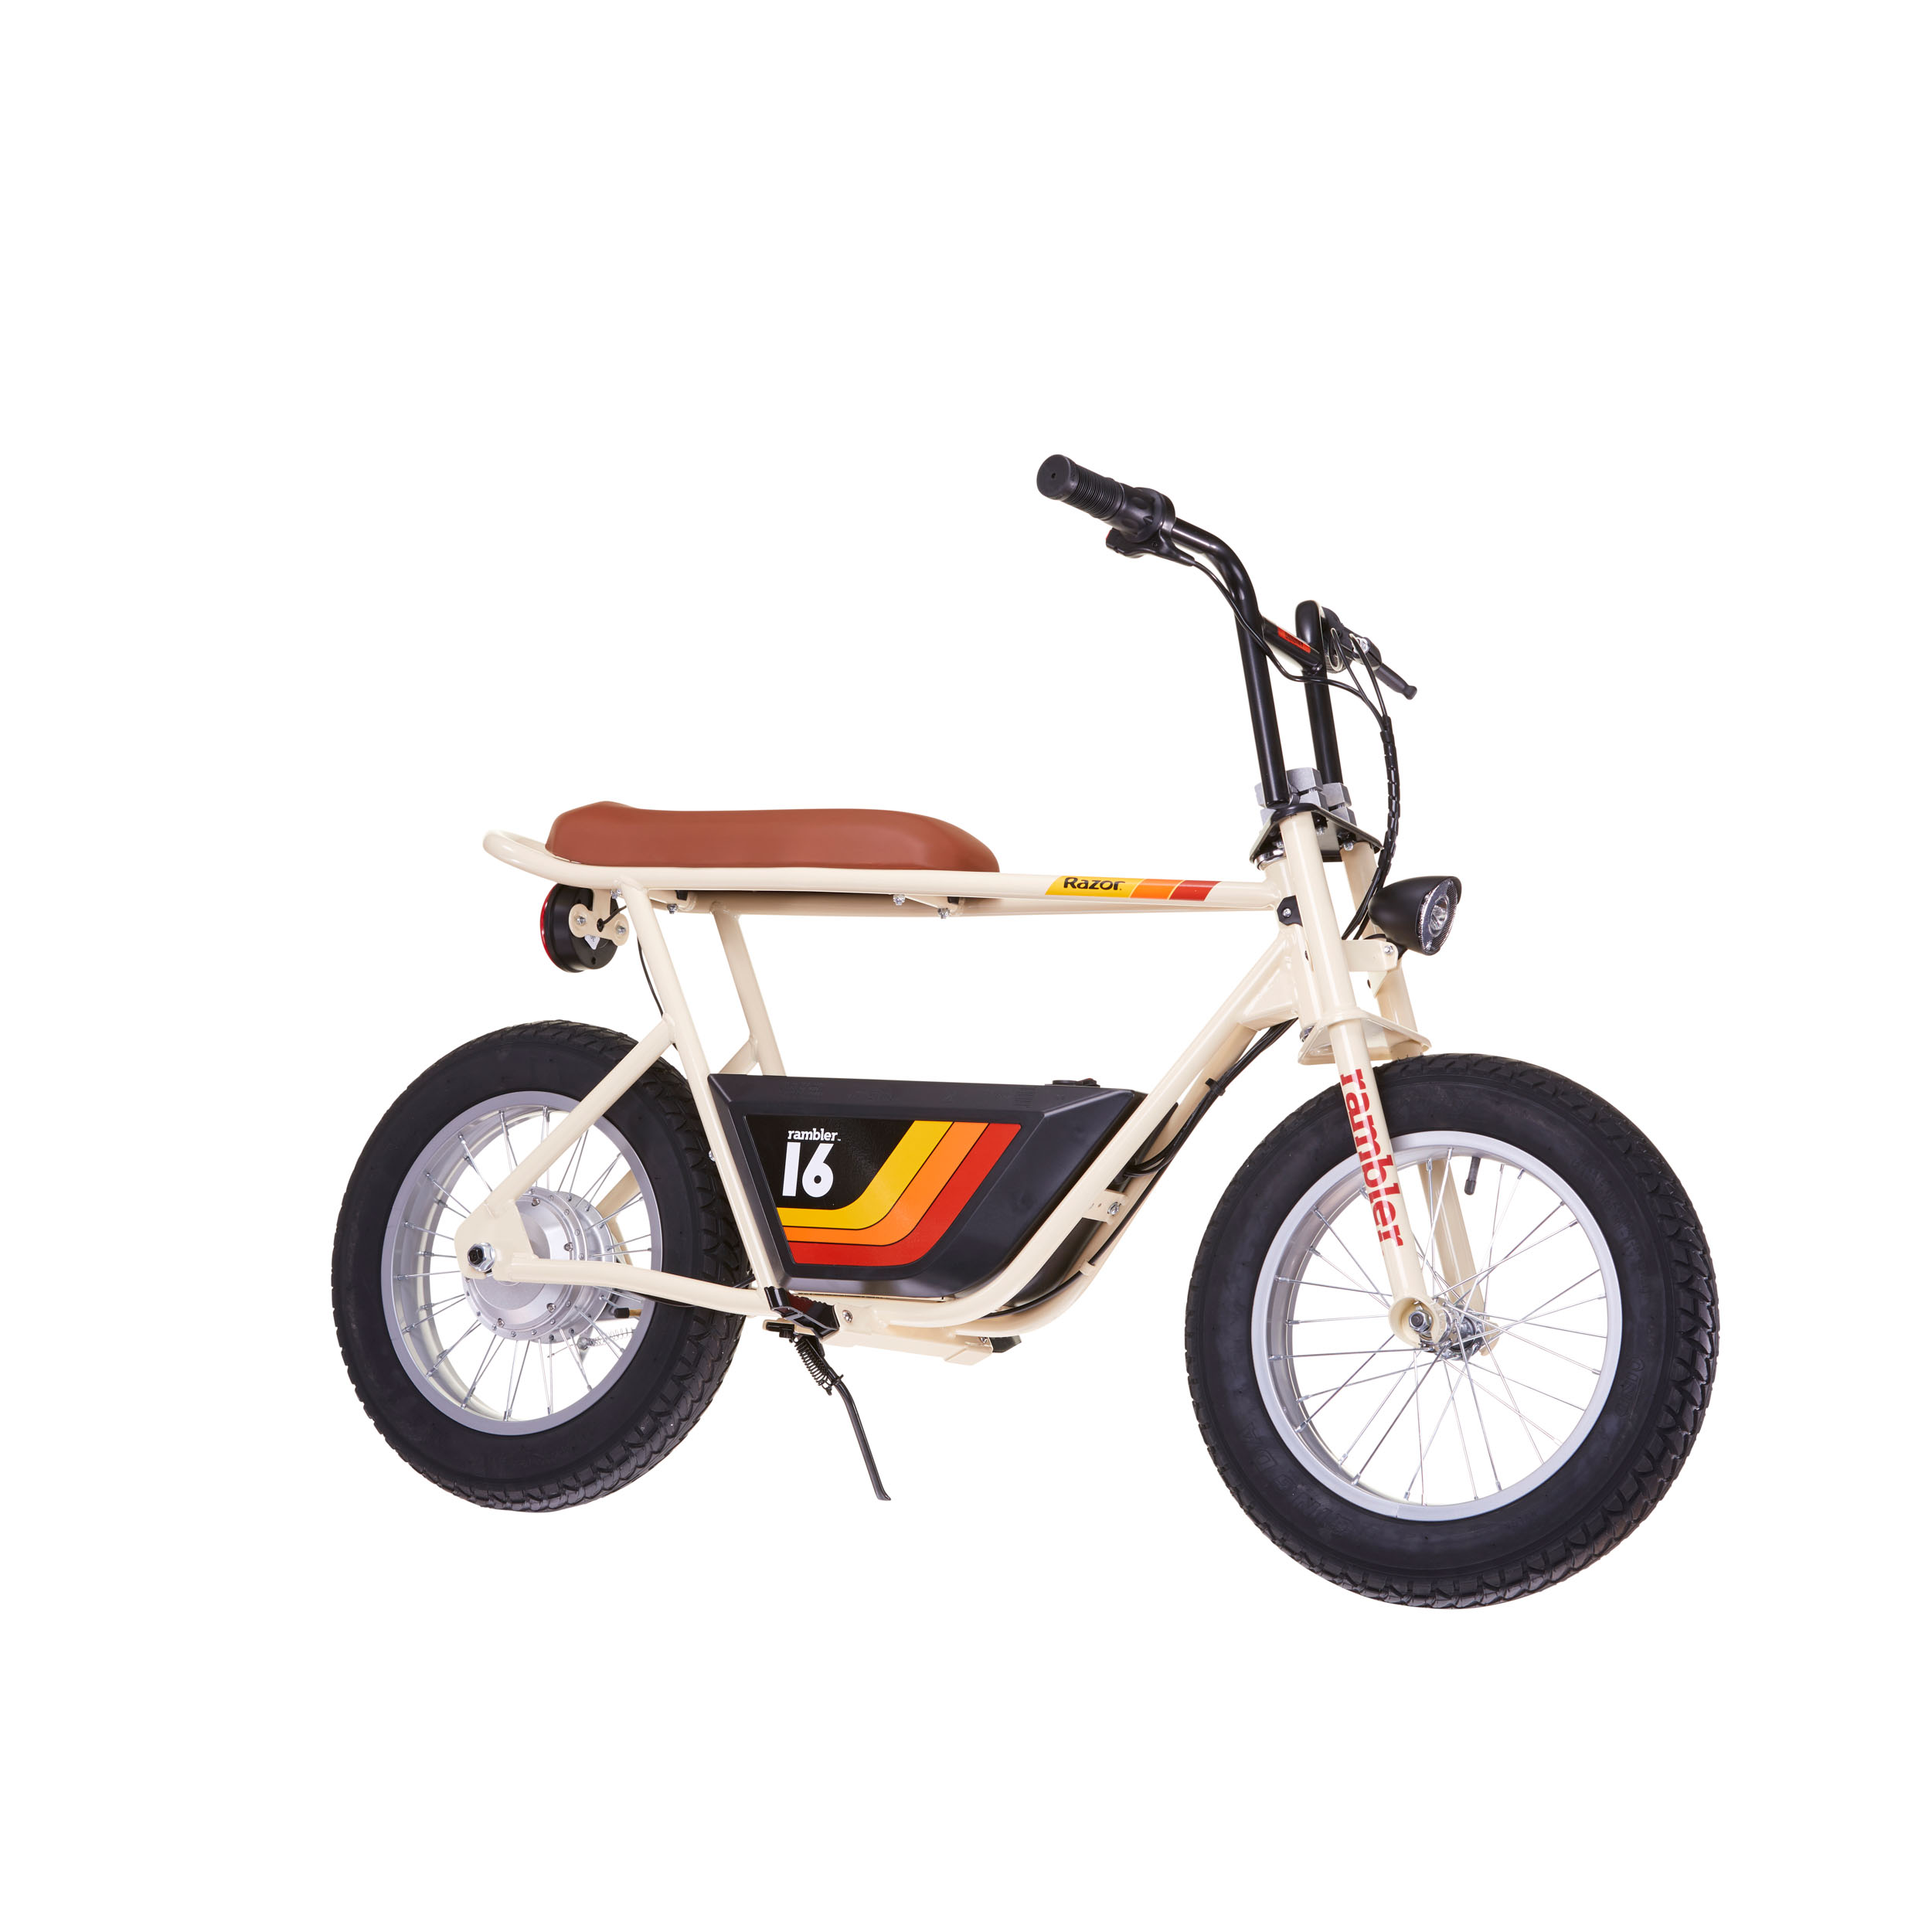  Razor Rambler 16 – 36V Electric Minibike with Retro Style, Up  to 15.5 MPH, Up to 11.5 Miles Range, Wide, Rugged 16 Air-Filled Tires,  Powerful 350 Watt Hub-Driven Motor : Everything Else